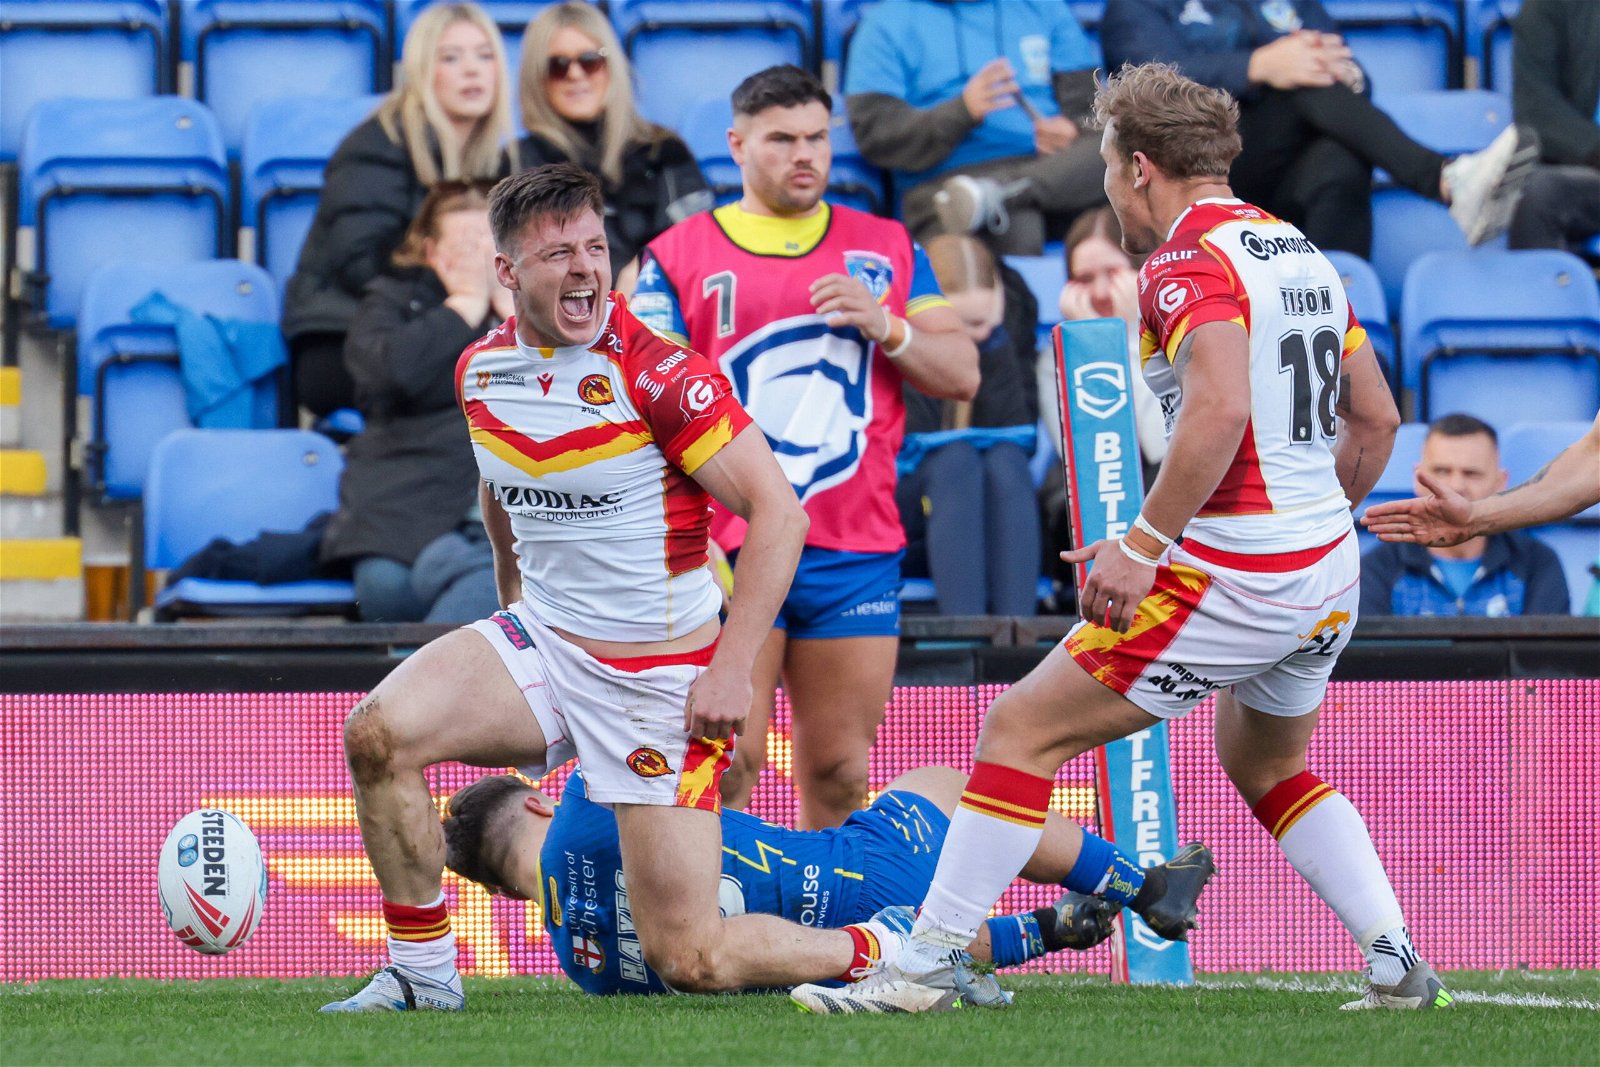 Catalans Dragons winger Tom Davies celebrates scoring in the corner against Warrington Wolves in the Super League.